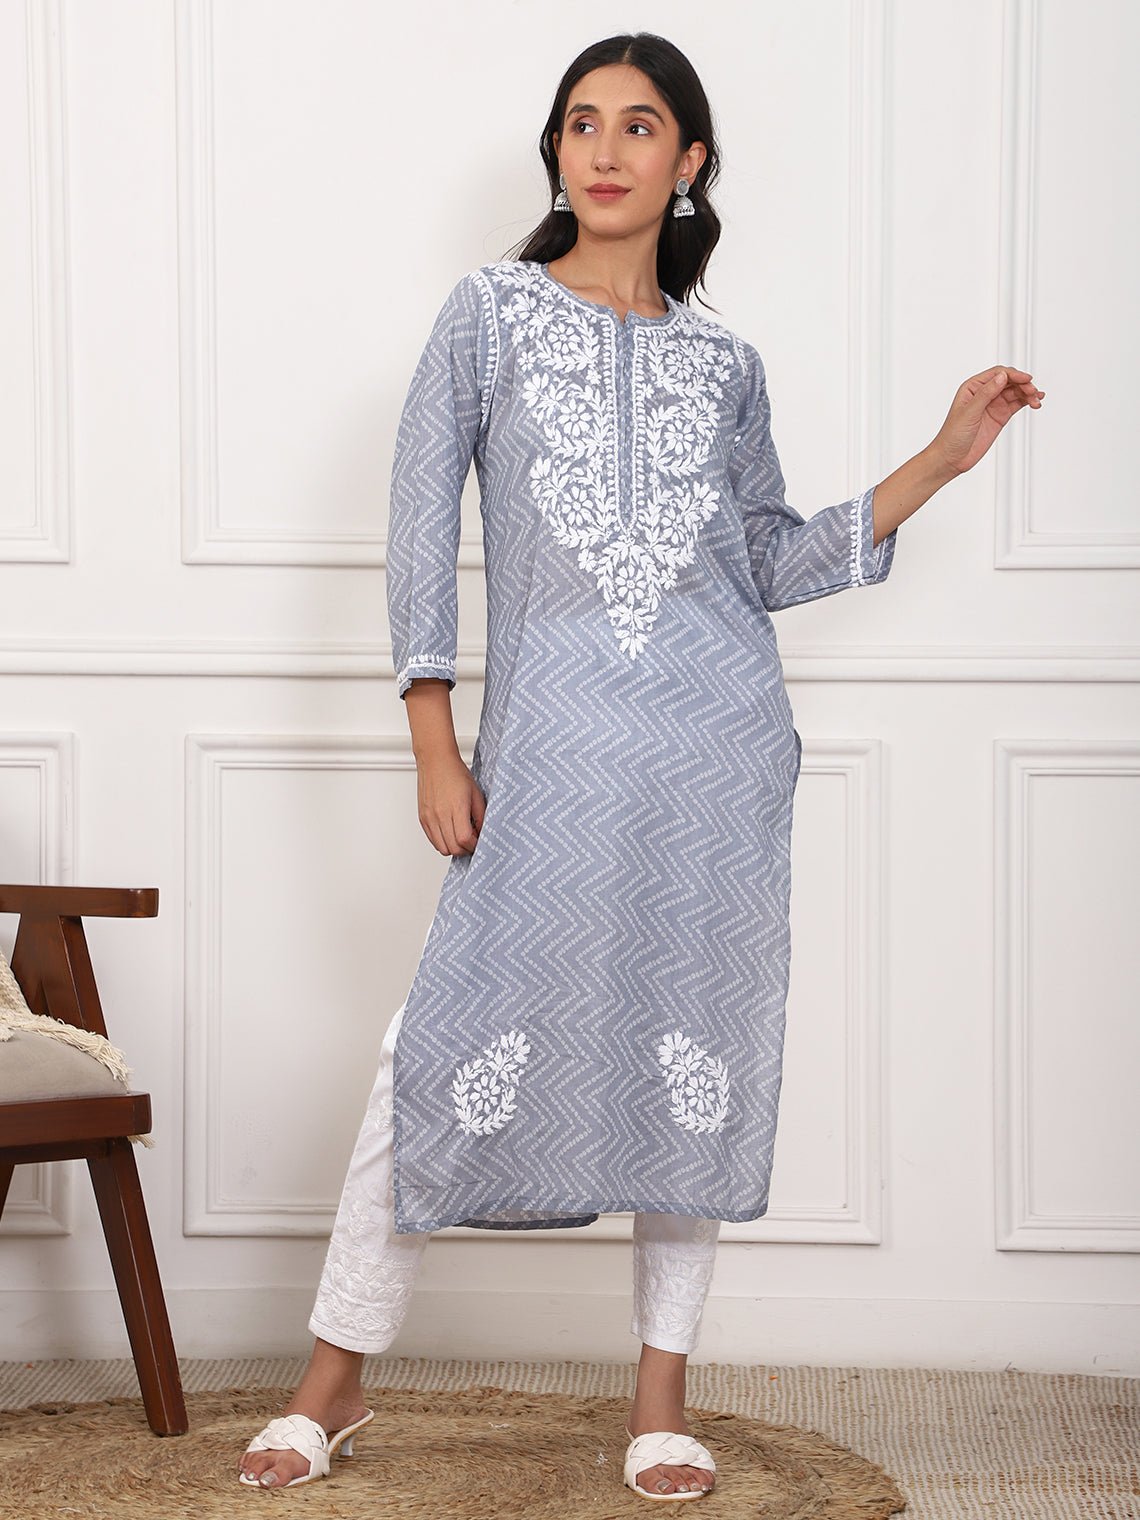 Zola Womens Exclusive Georgette Lucknowi Chikankari Kurti (220732-Grey-L)  in Jaipur at best price by Tani Fashion - Justdial